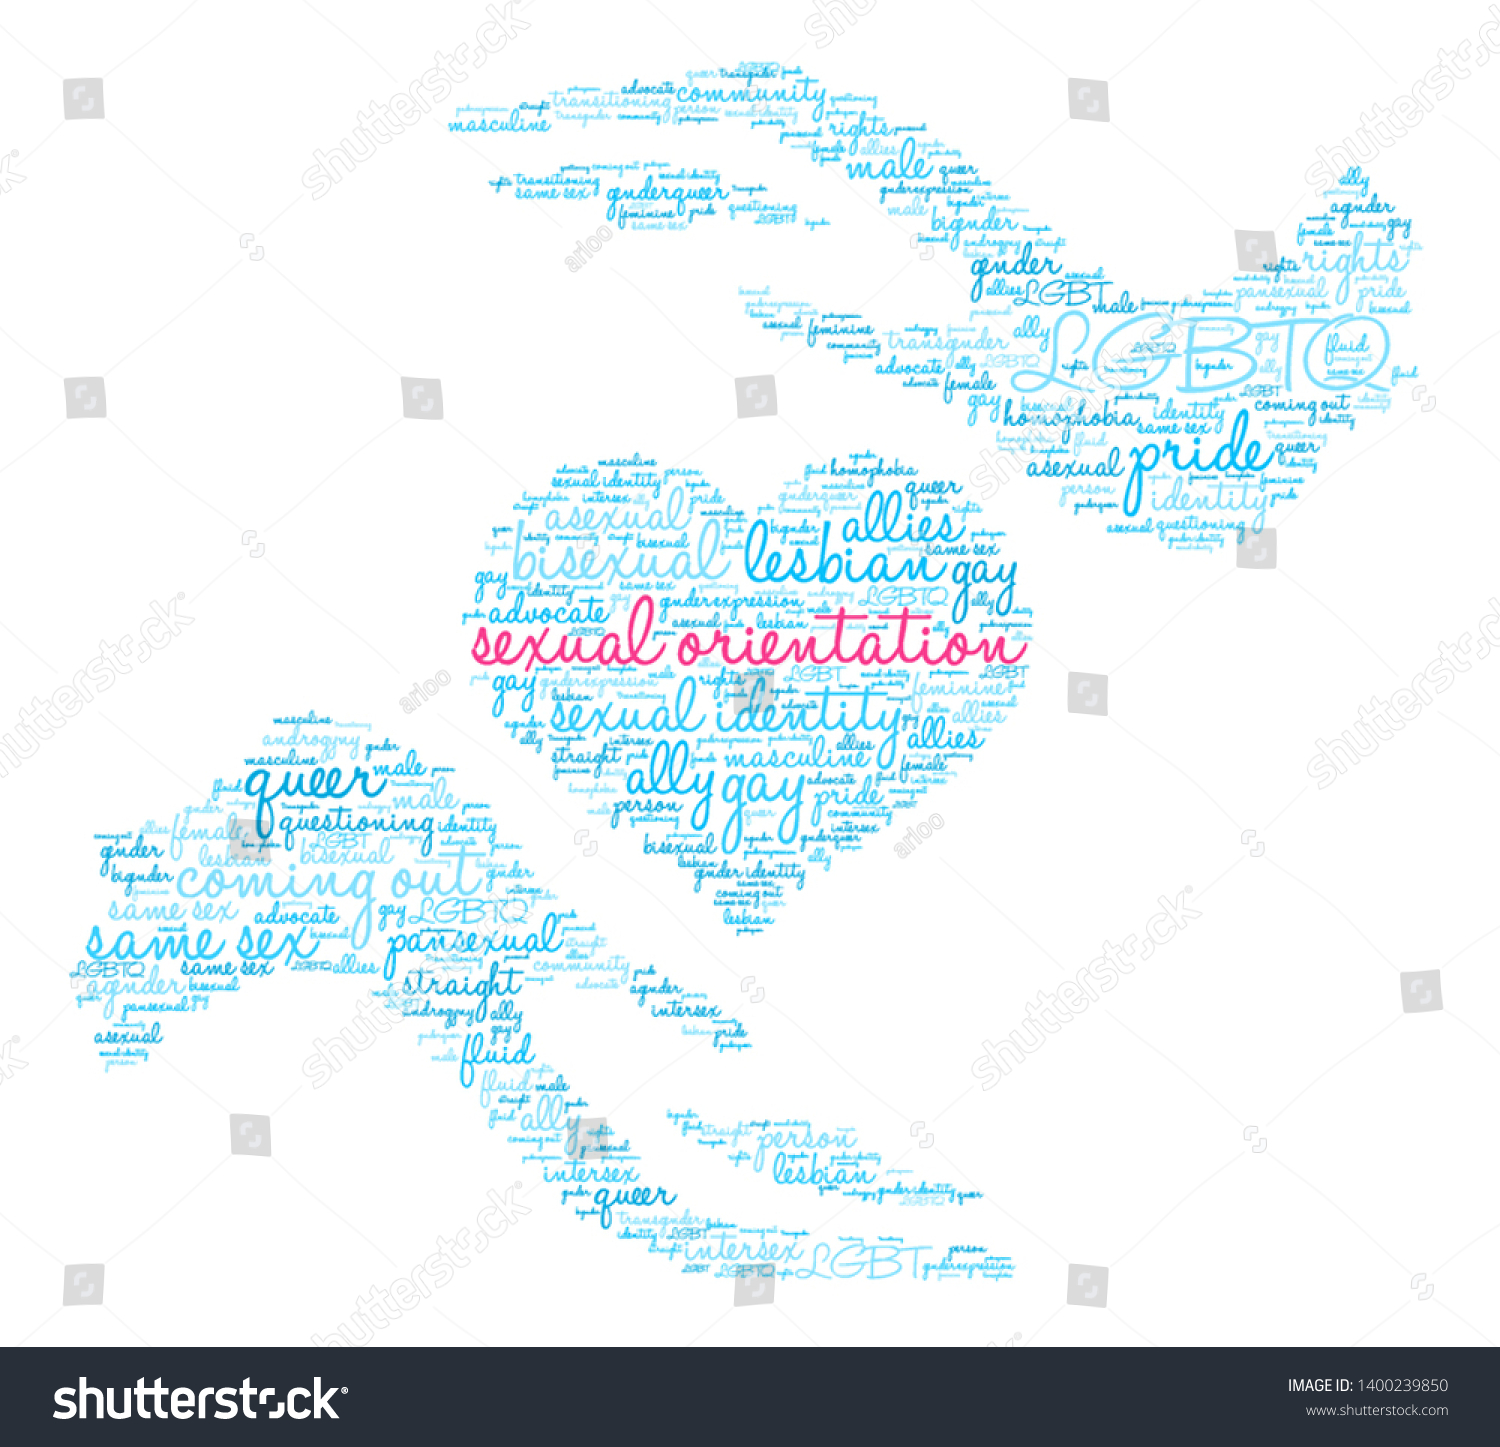 Sexual Orientation Word Cloud On White Stock Vector Royalty Free 1400239850 Shutterstock 2854